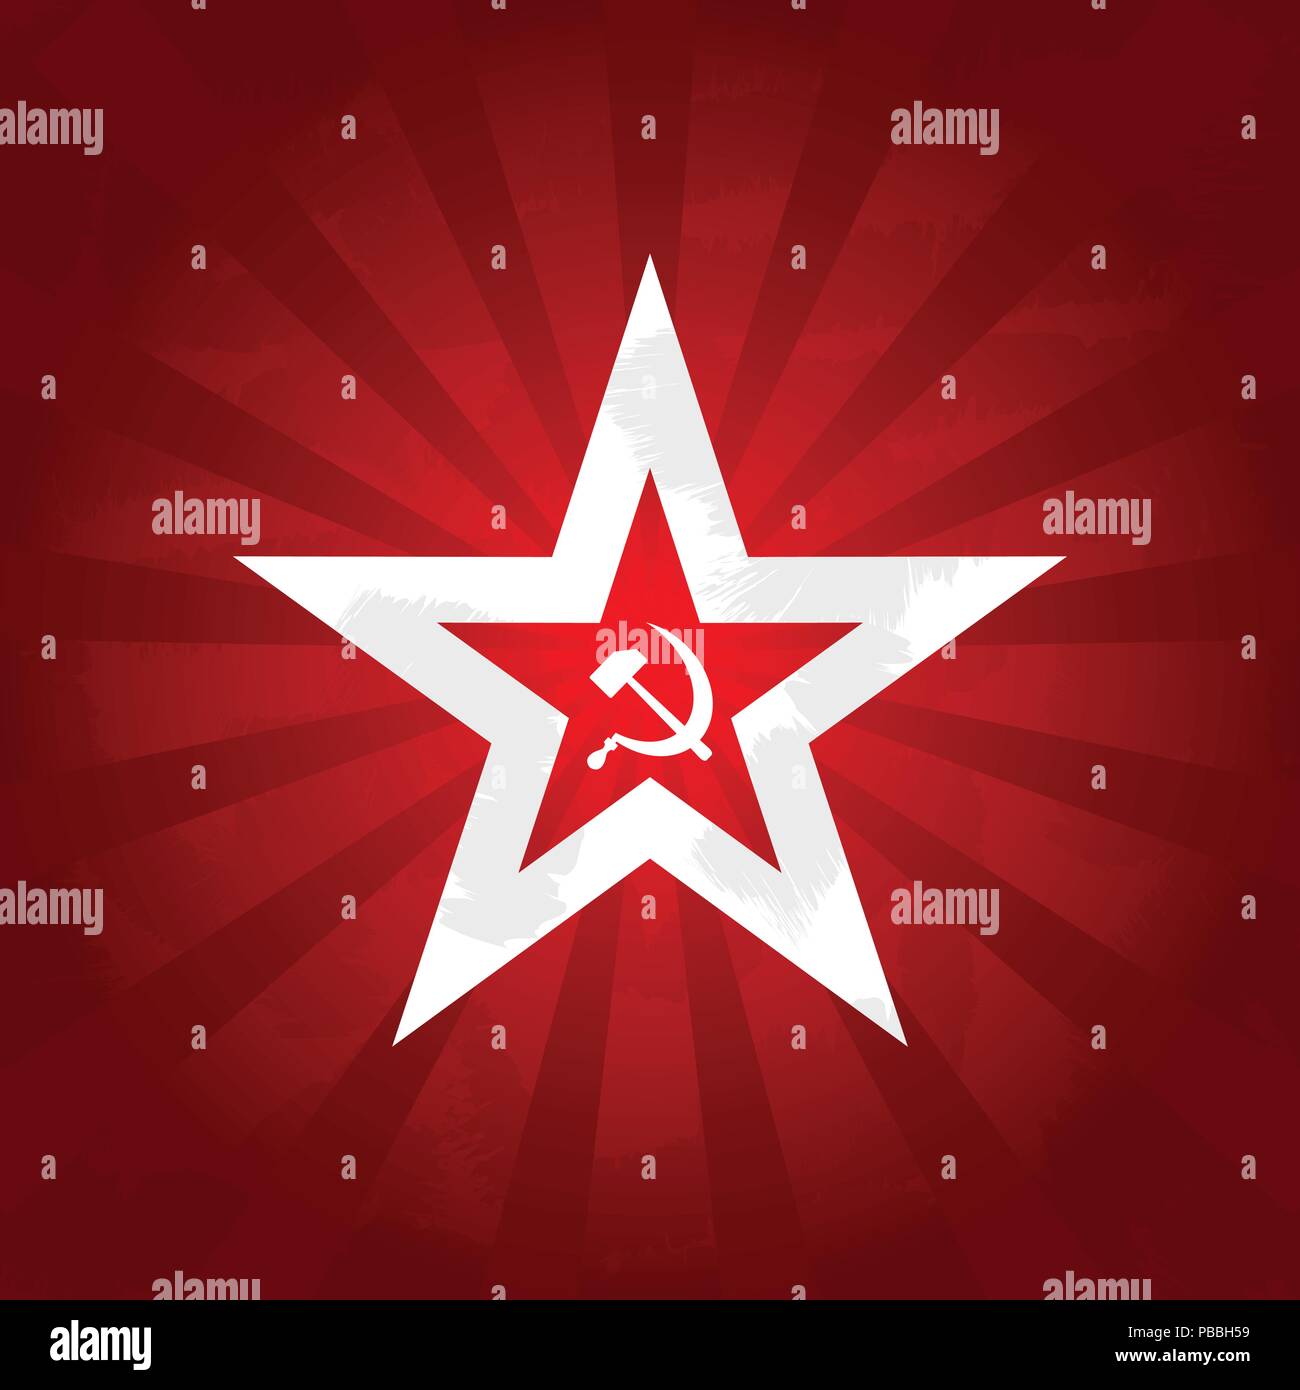 Communism symbols - red with sickle and hammer Vector Image & Art - Alamy